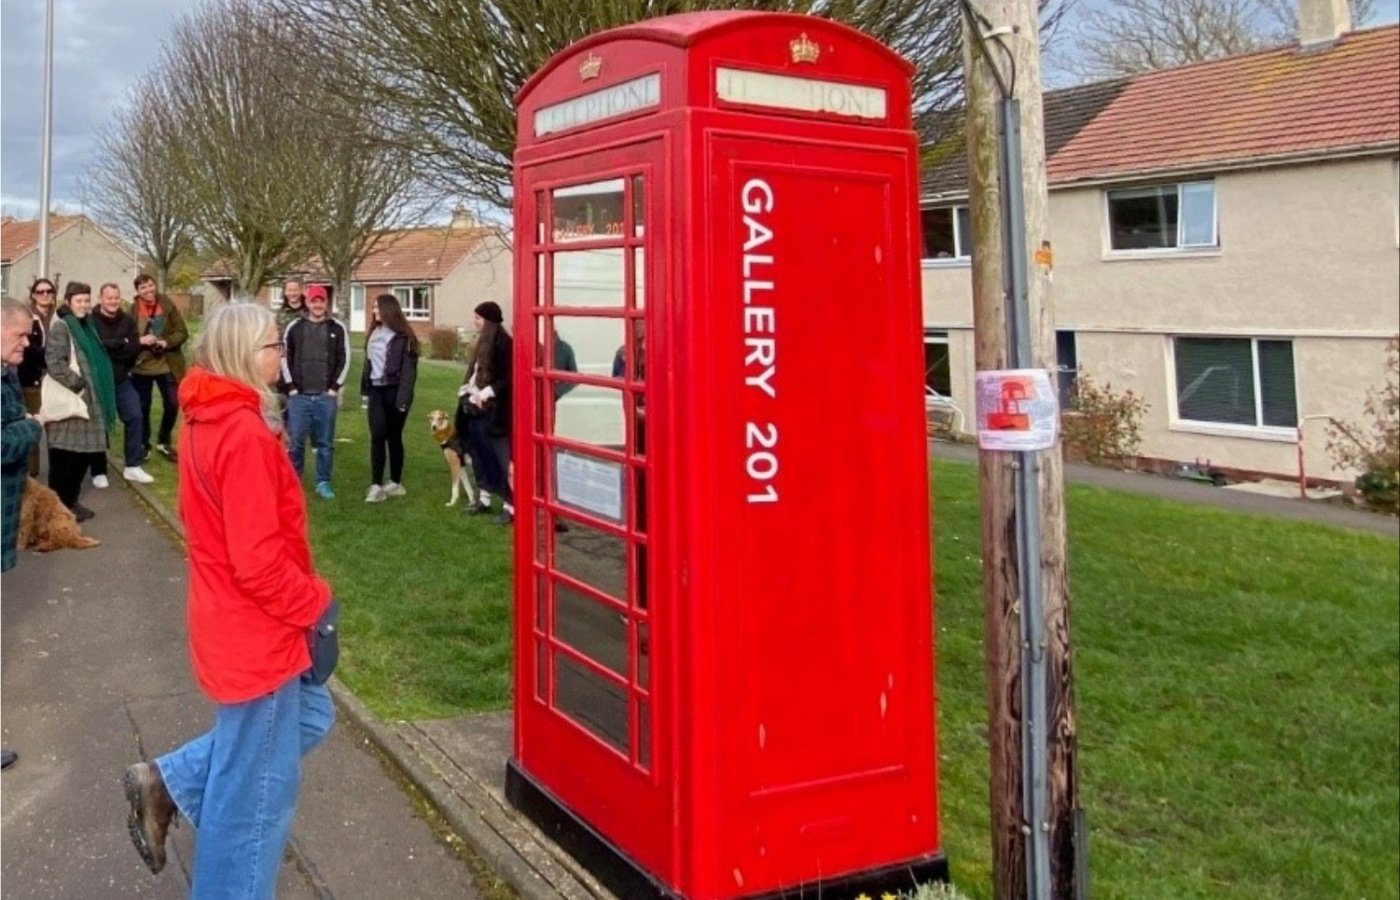 Adopted kiosk becomes the Telephone Box Gallery near St Andrews.